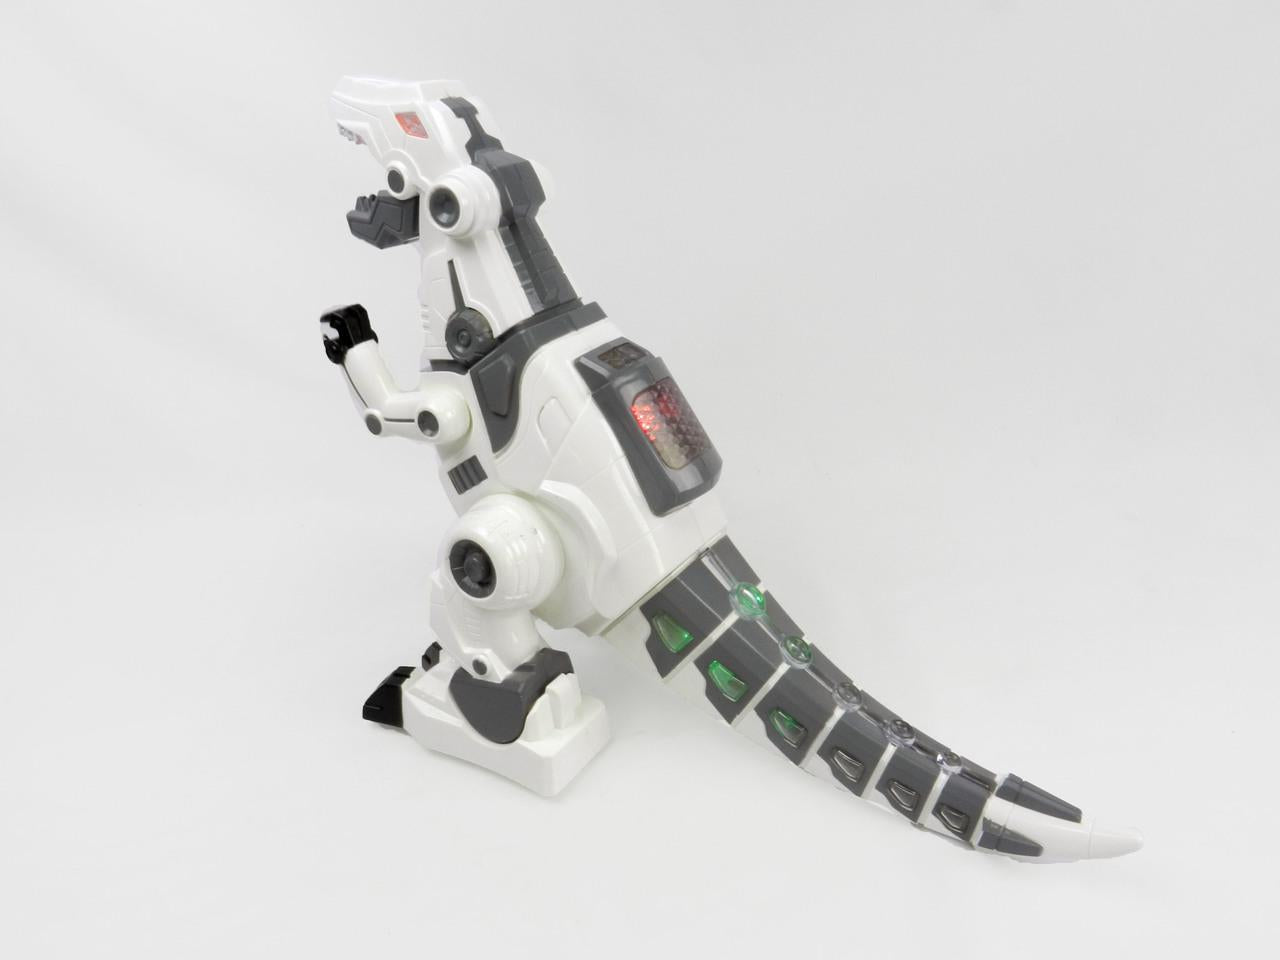 Dinosaur Mechanical T-Rex Toys Robot For kids Preschool Education - Swinging Up and Down, Stepping Forward With Both Feet.